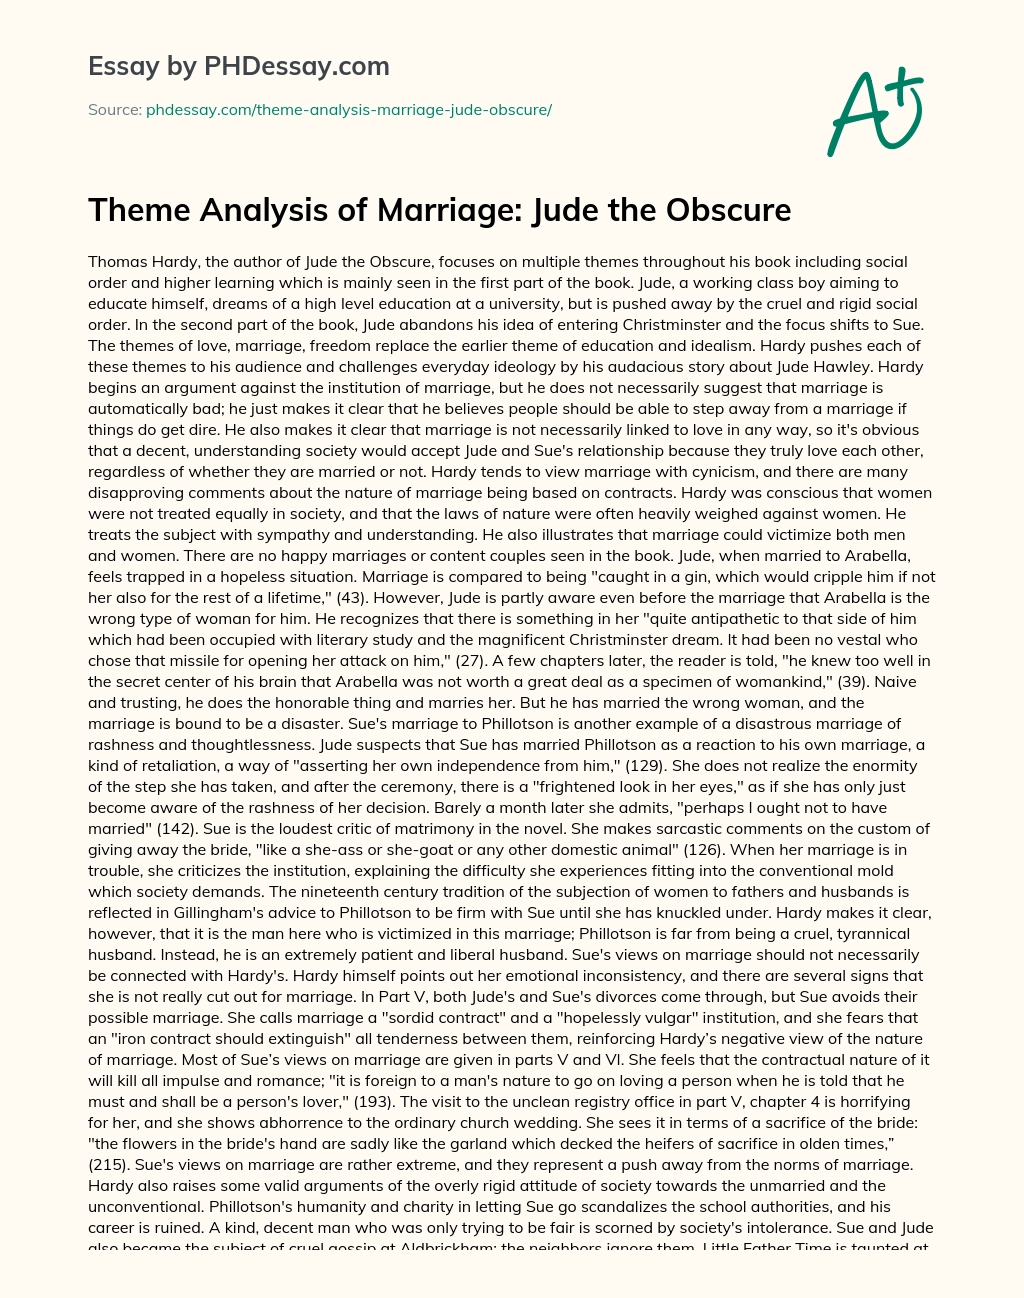 Theme Analysis of Marriage: Jude the Obscure essay